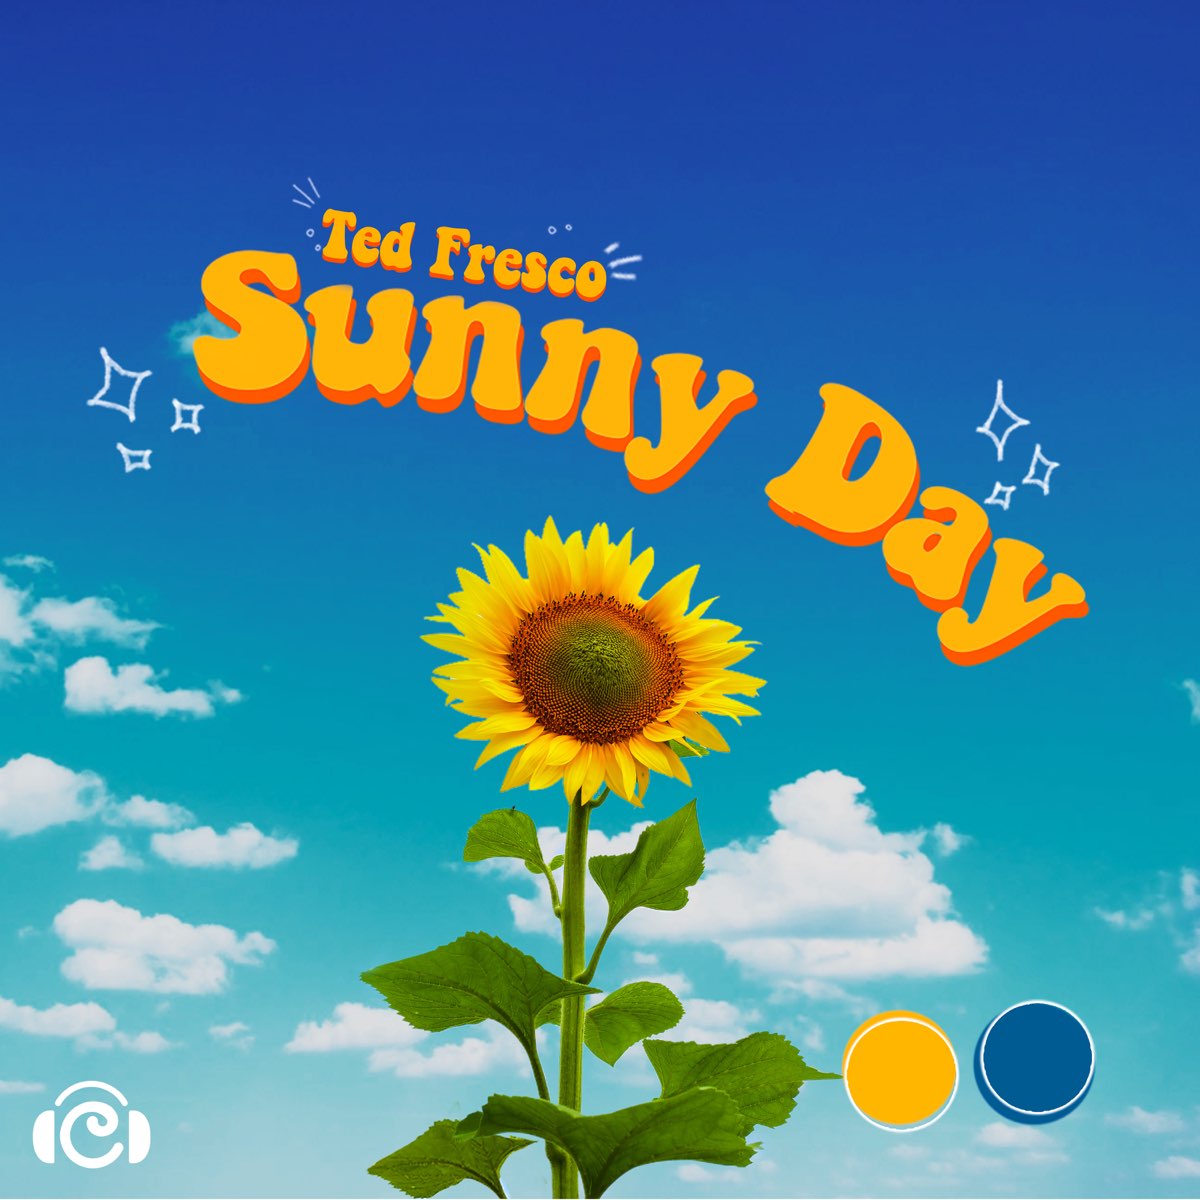 Something wrong with sunny day